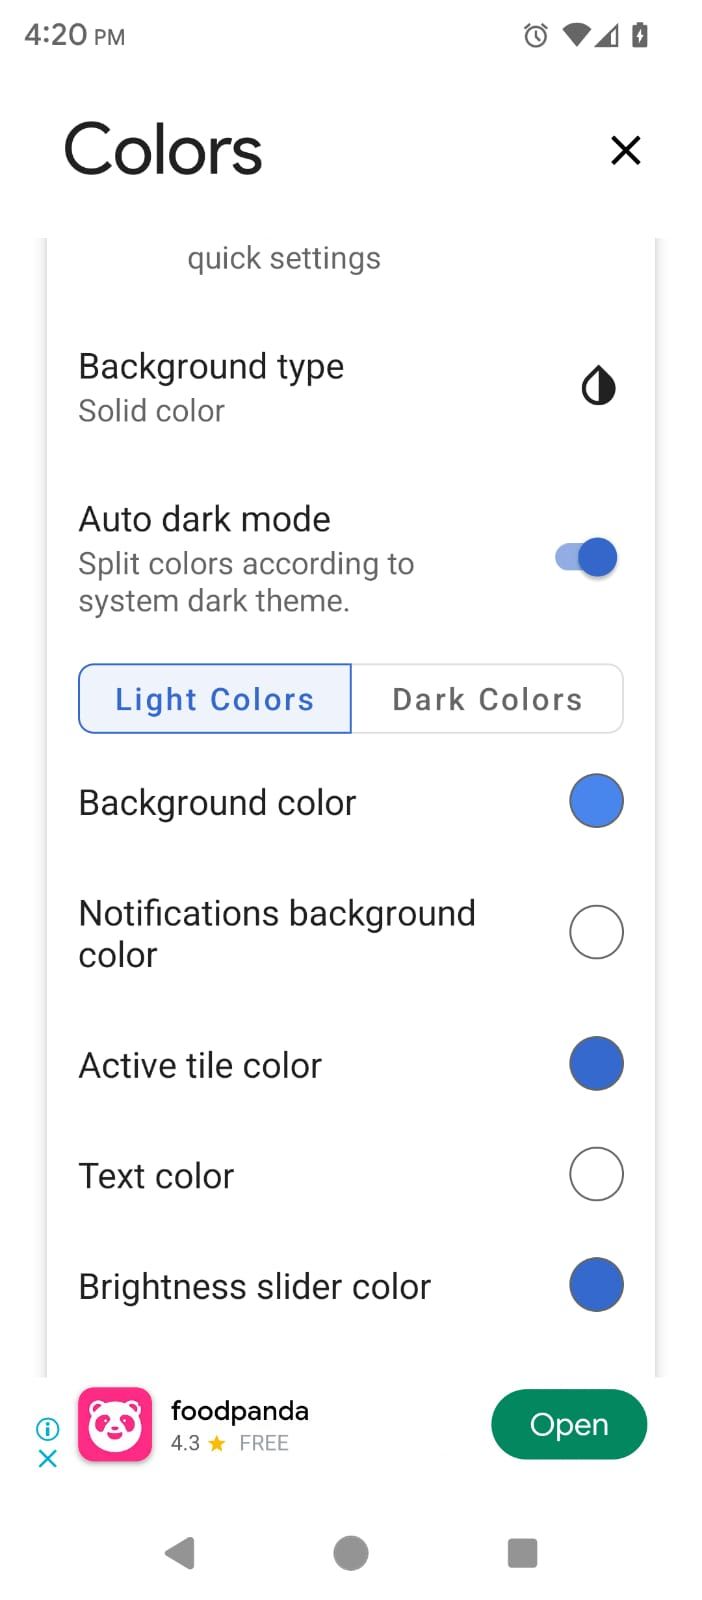 Color settings in Power Shade